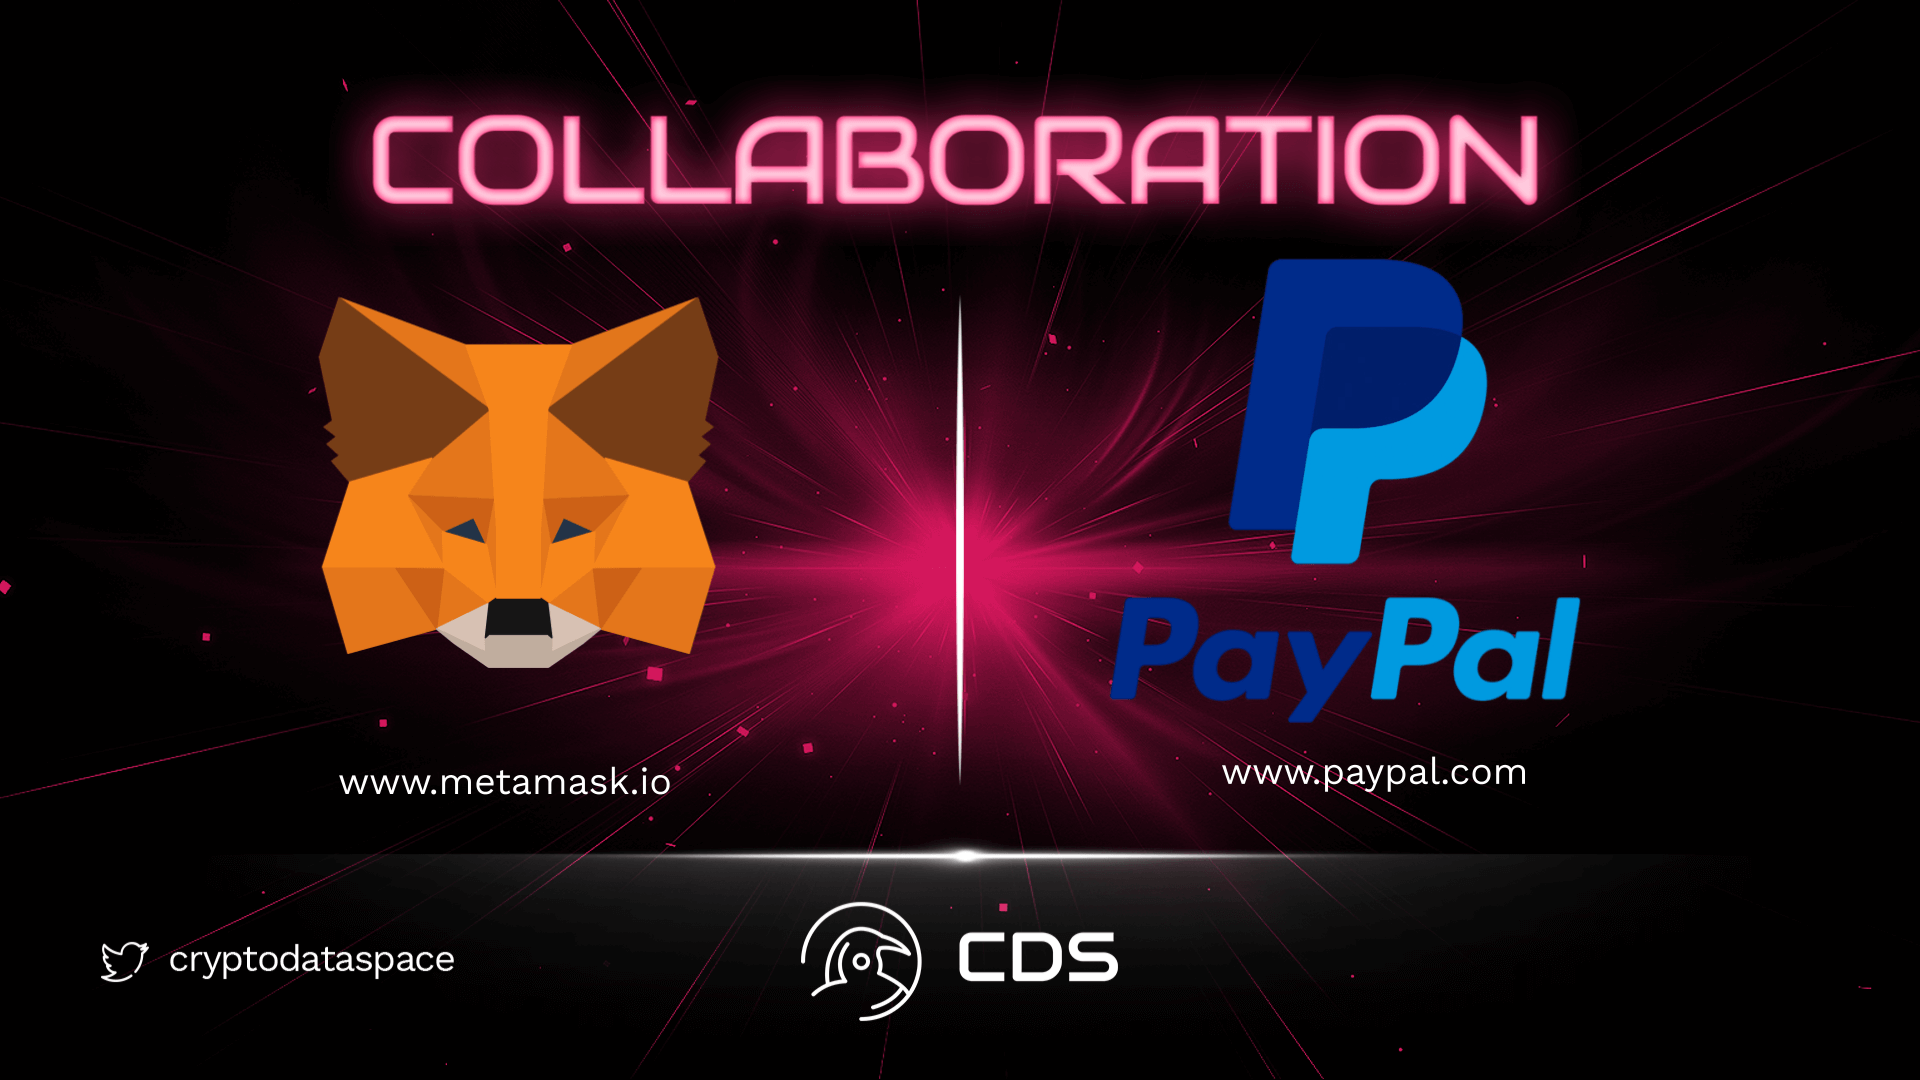 Collaboration from Metamask and Paypal